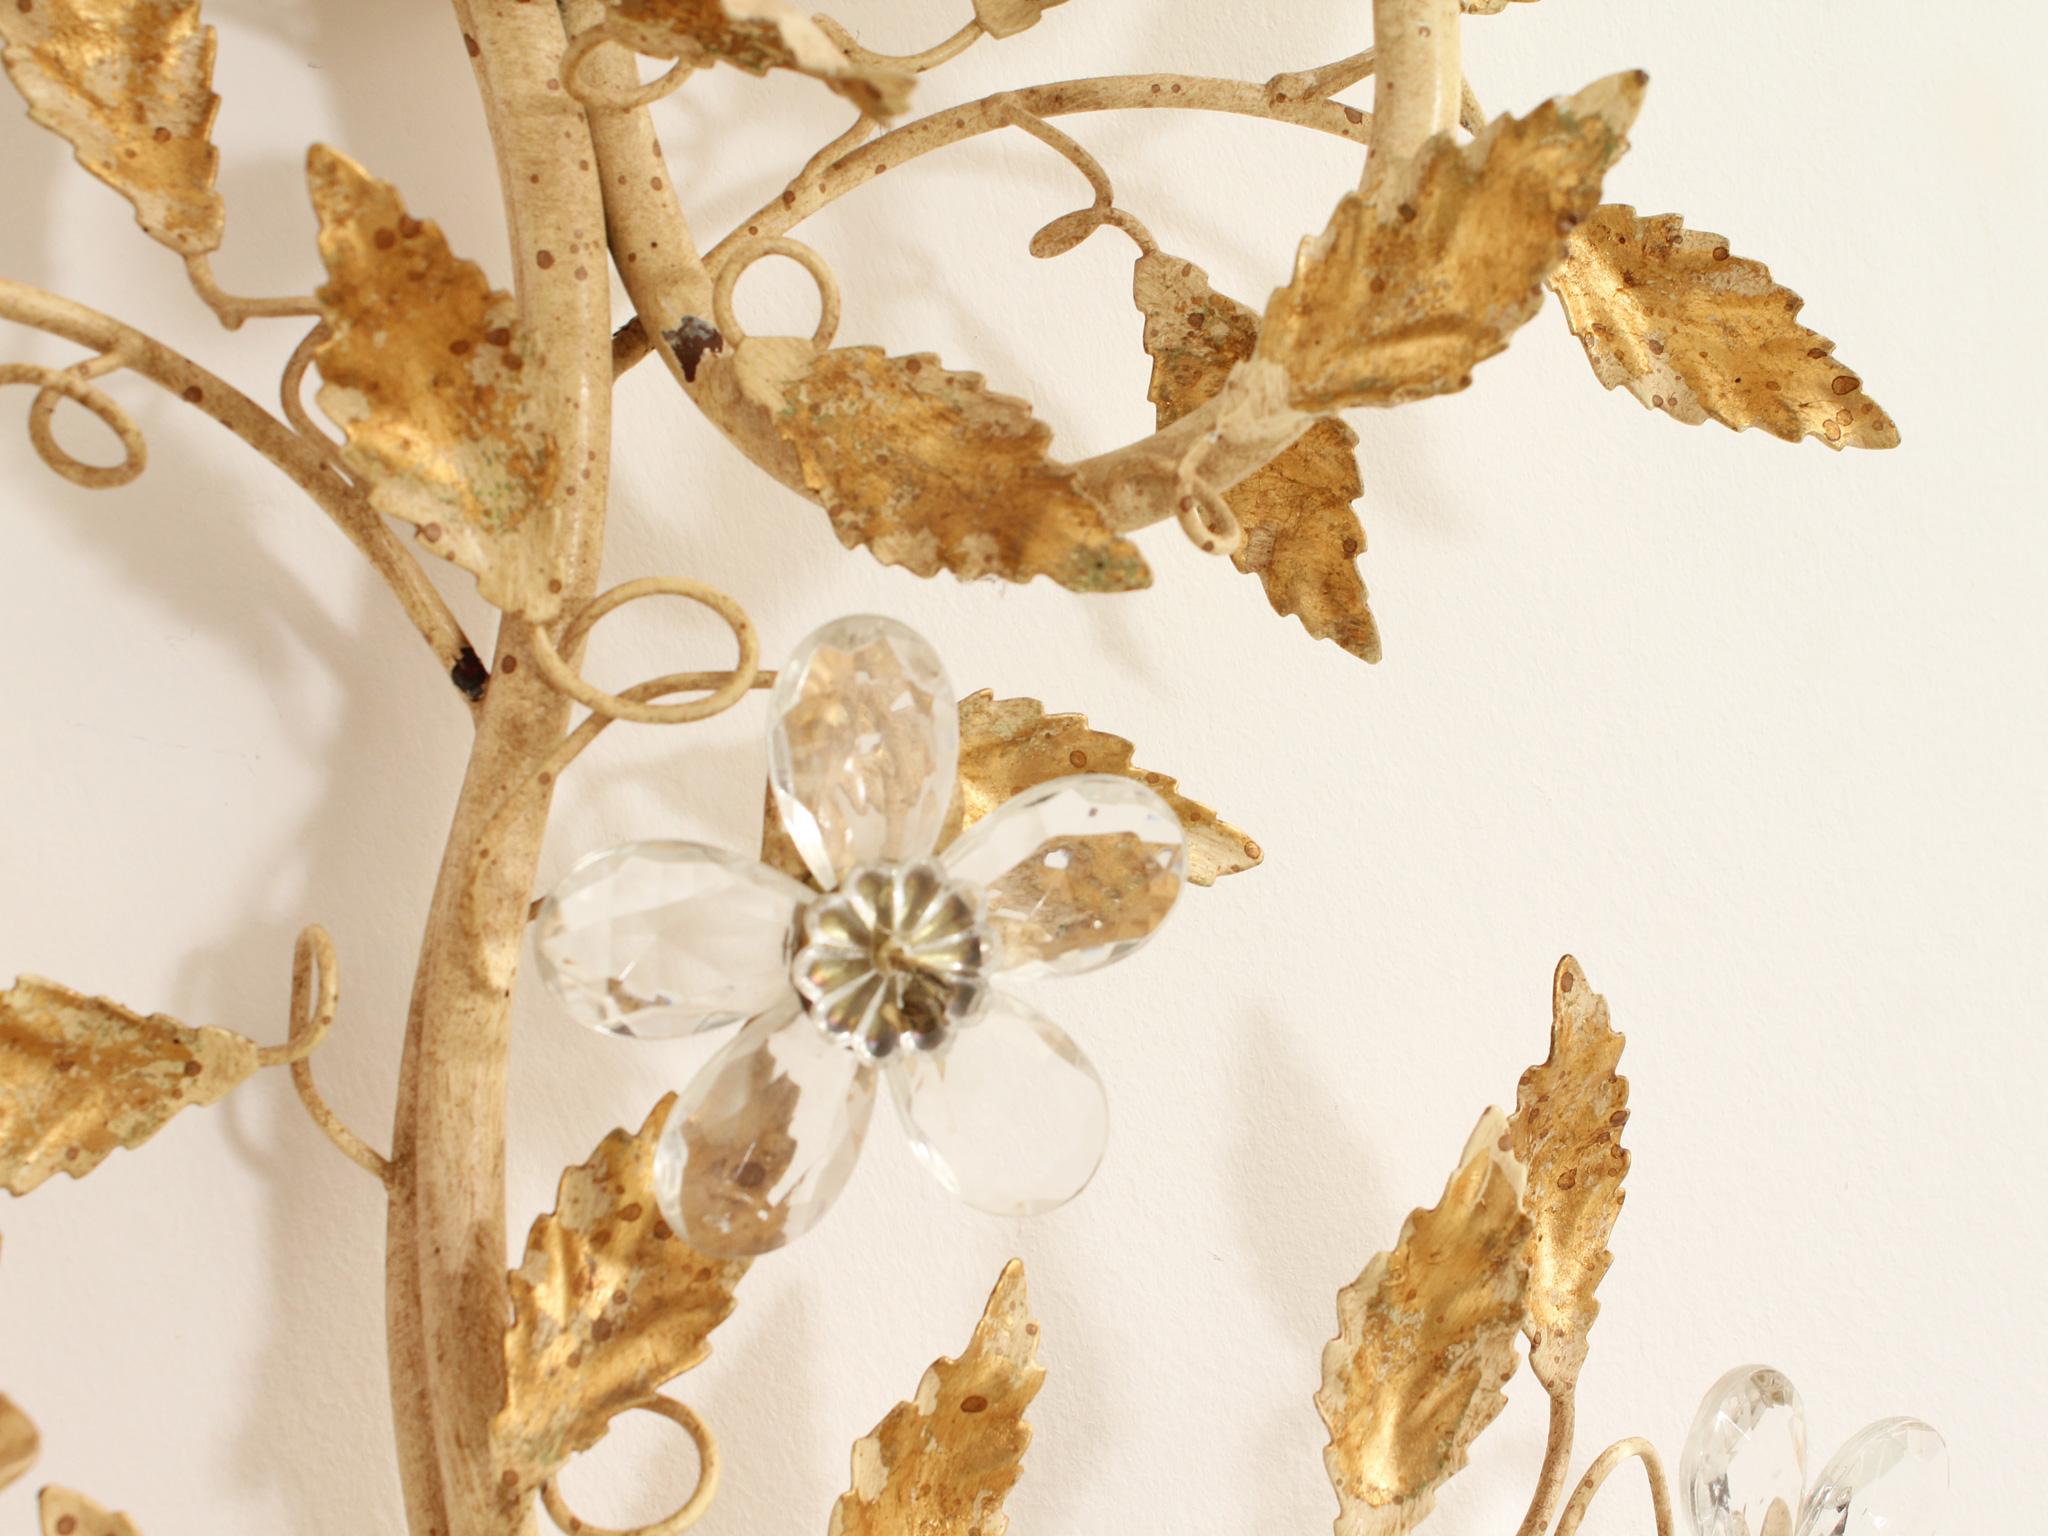 Pair of Large Floral Sconces in Gilt Metal from 1960s, Spain For Sale 4